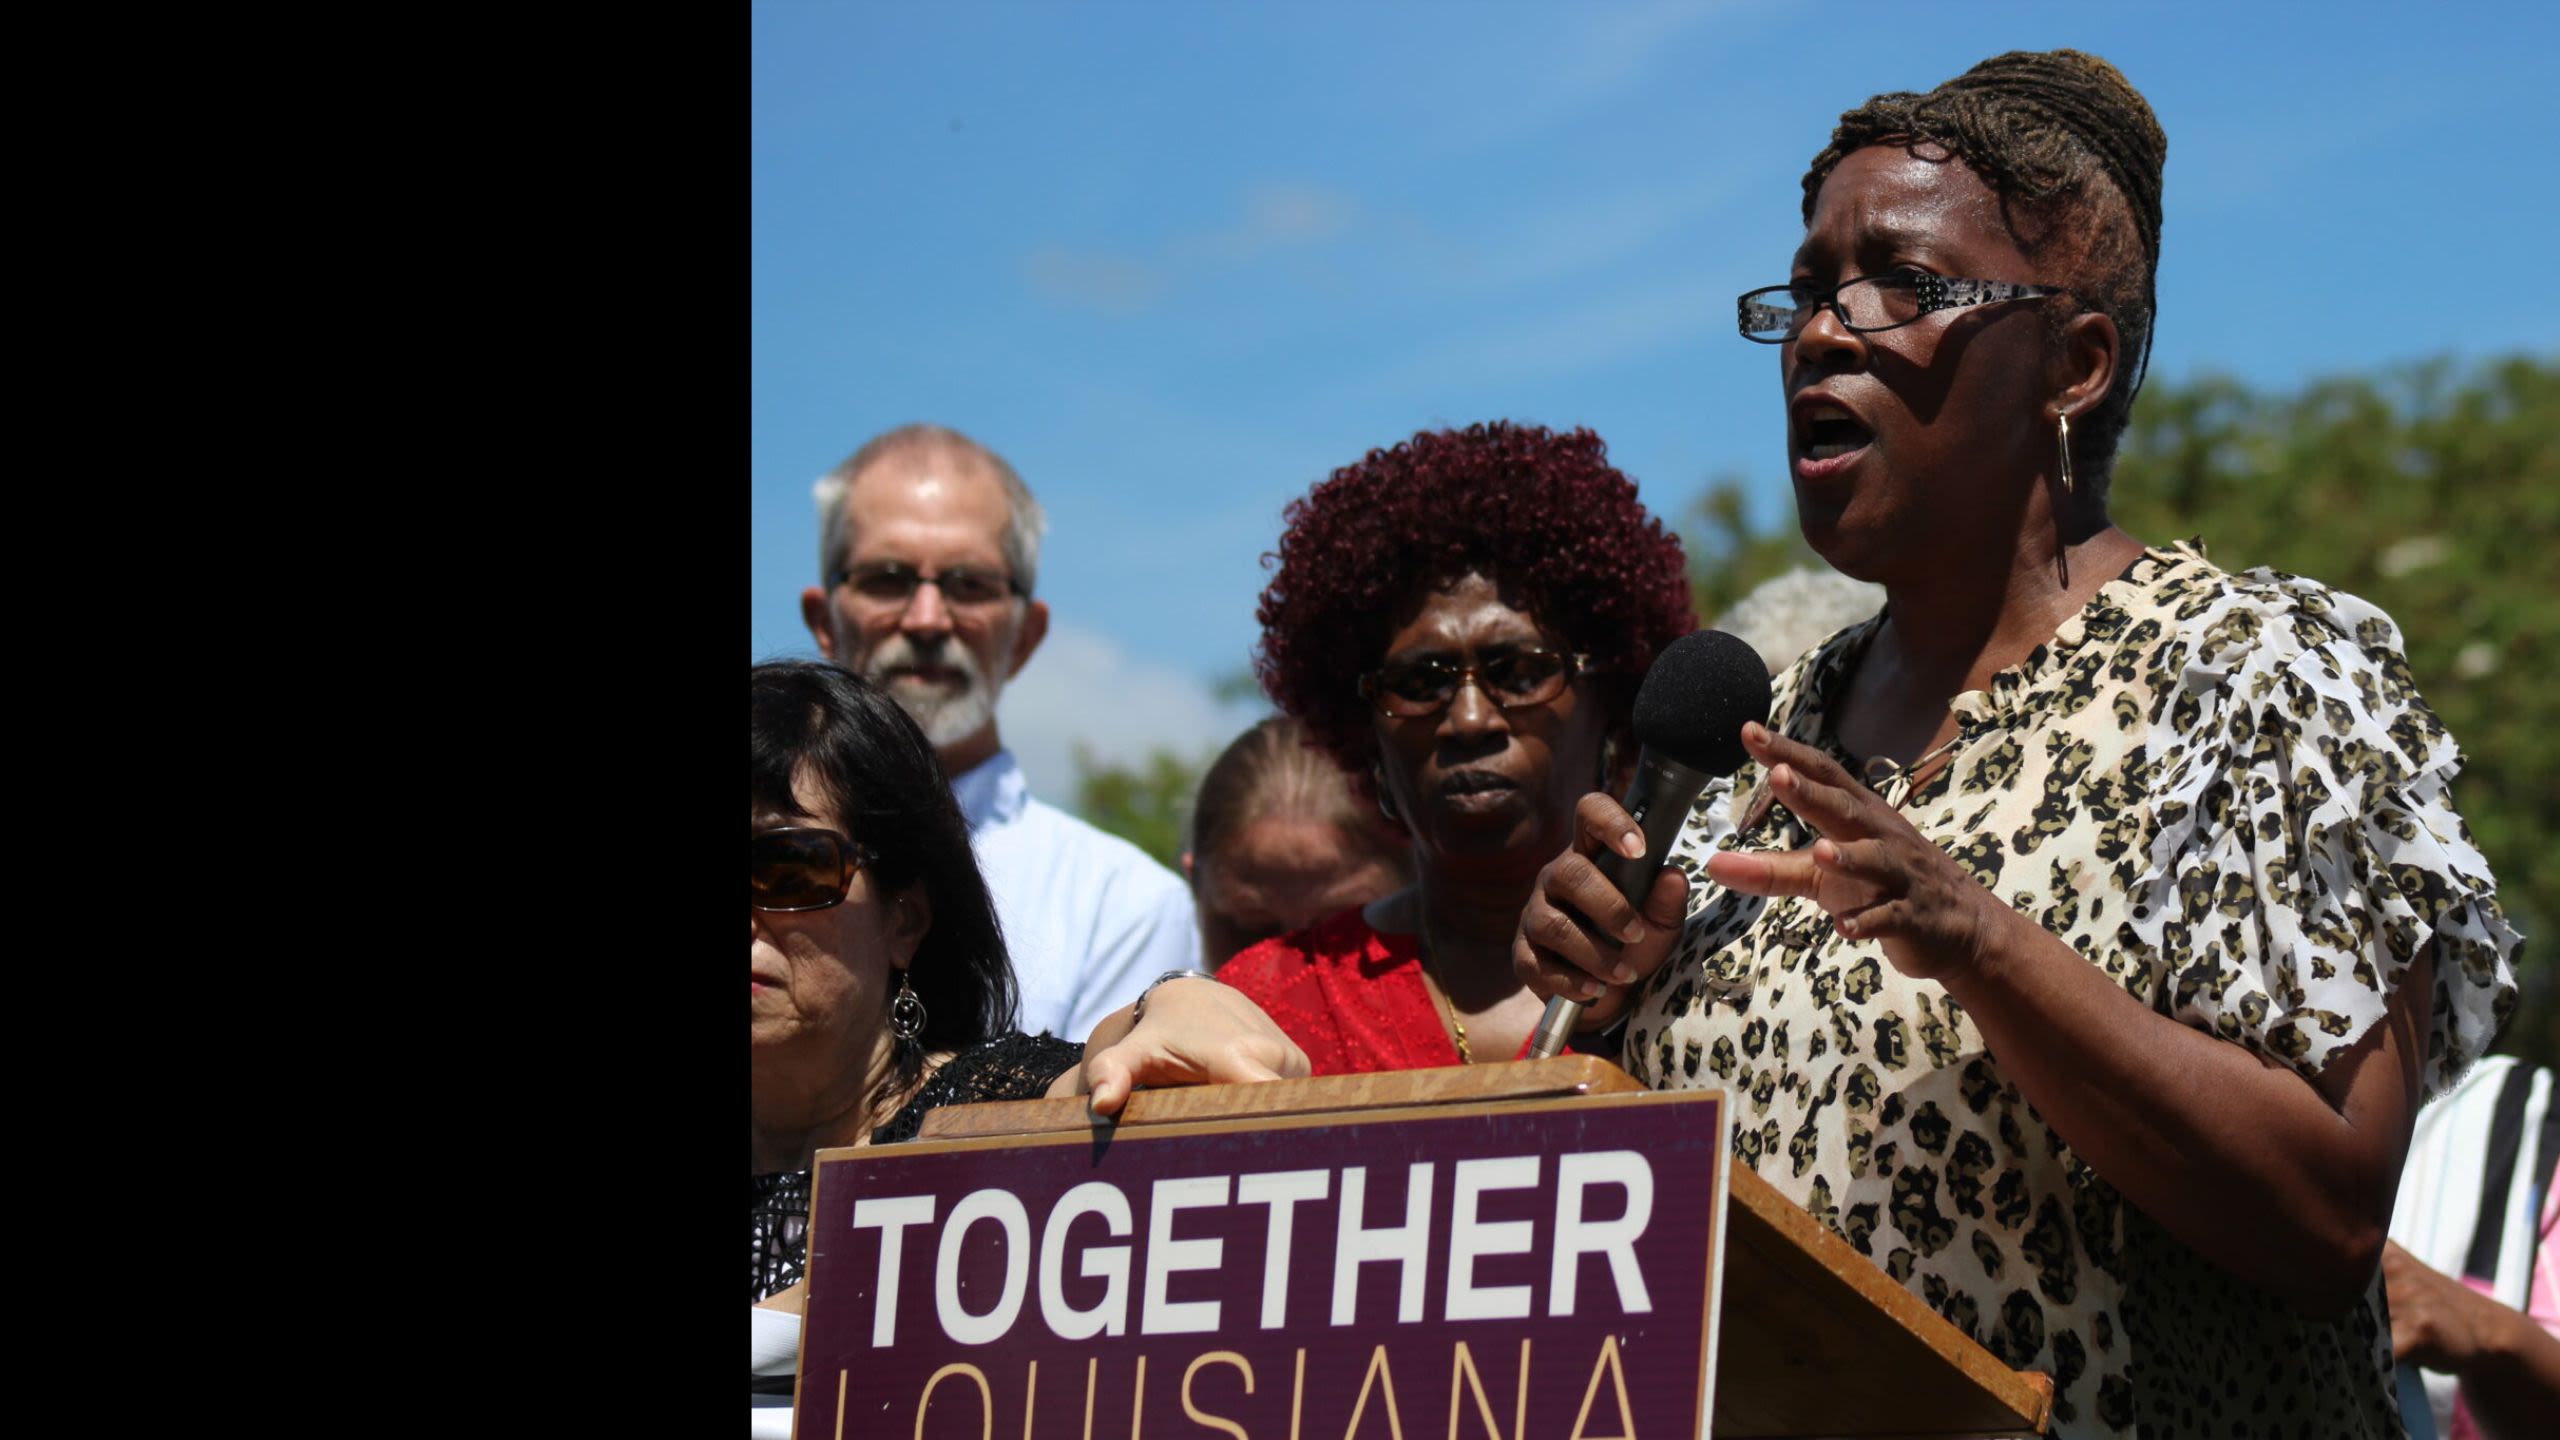 Ms. Wanda Manning campaigns outside the Louisiana State Capitol in Baton Rouge